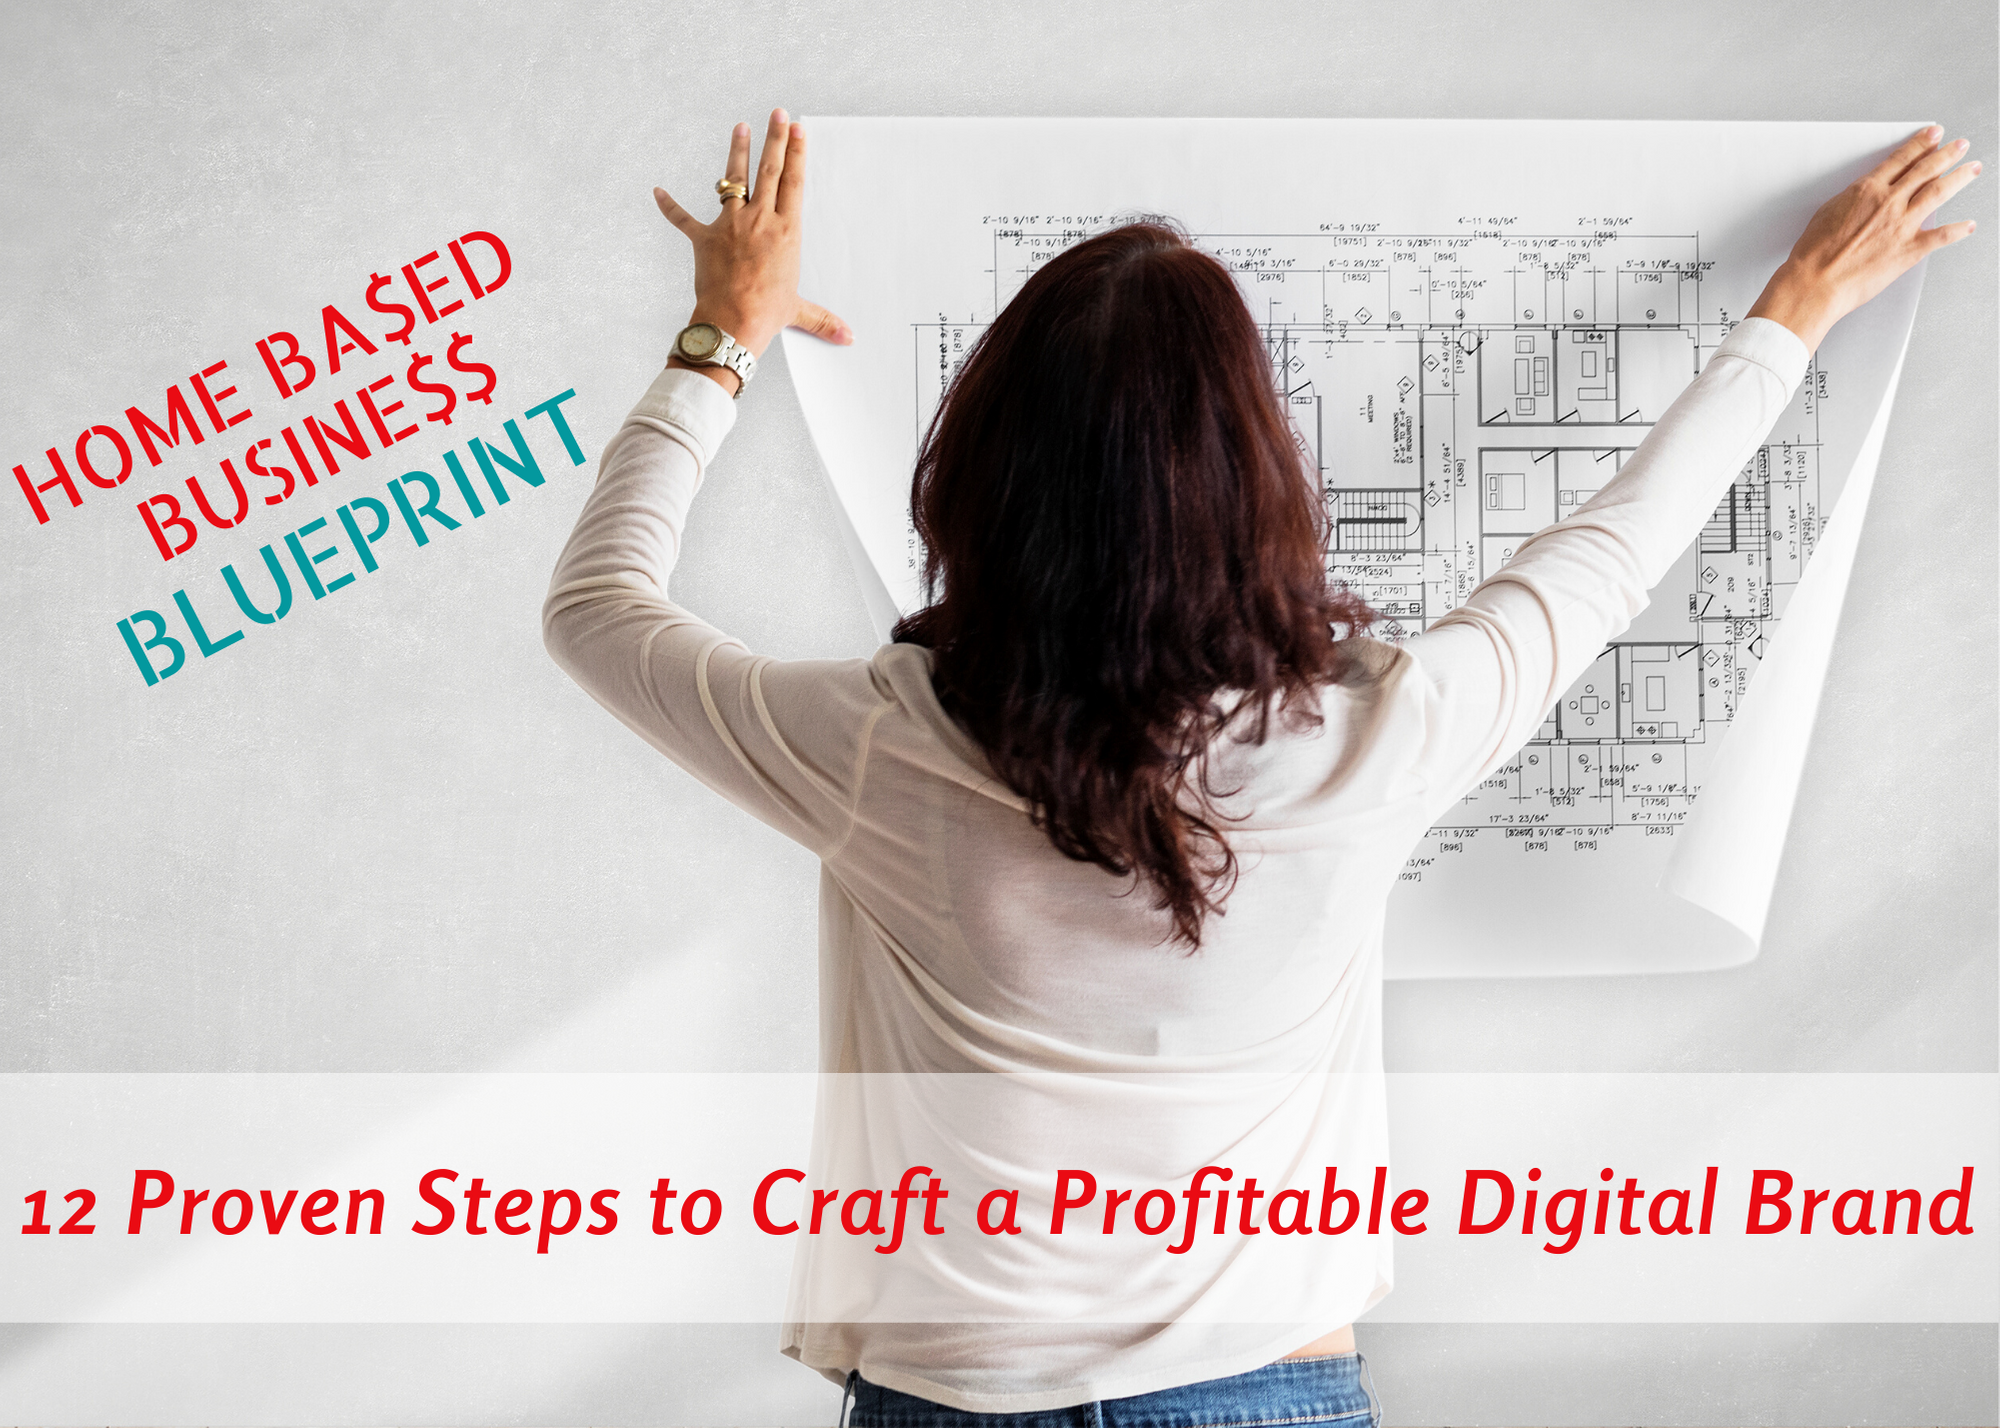 Home based Business Blueprint ~ 12 Proven Steps to Craft a Profitable Digital Brand